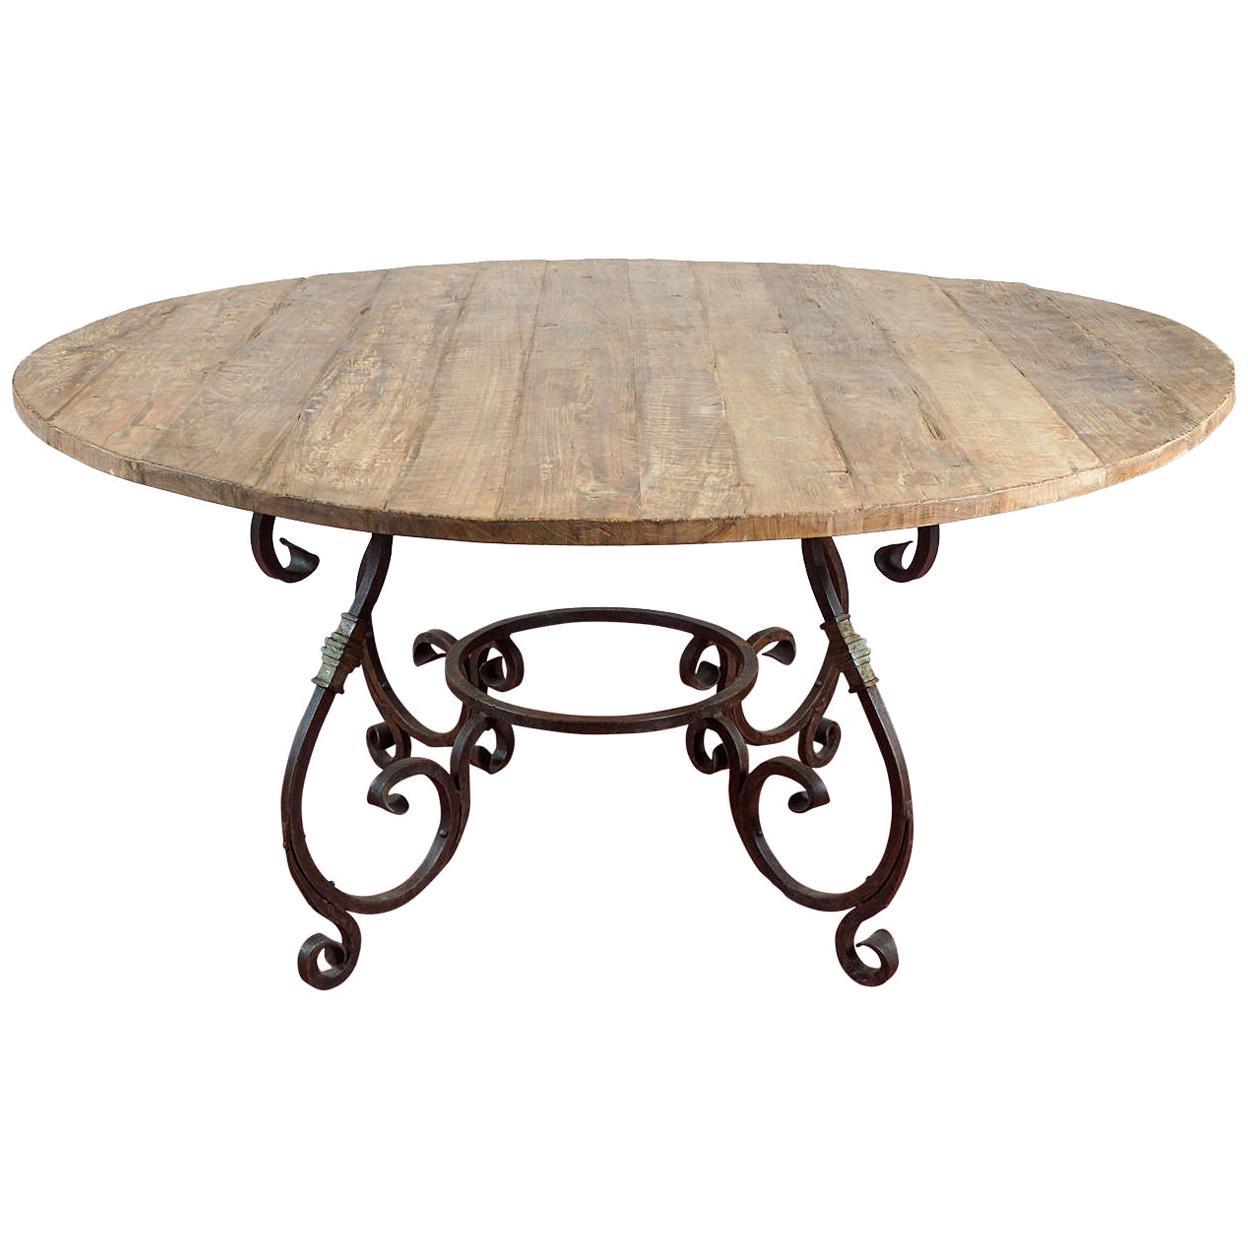 Rustic Outdoor or Indoor Round Teak Wood and Metal Base Dining Table